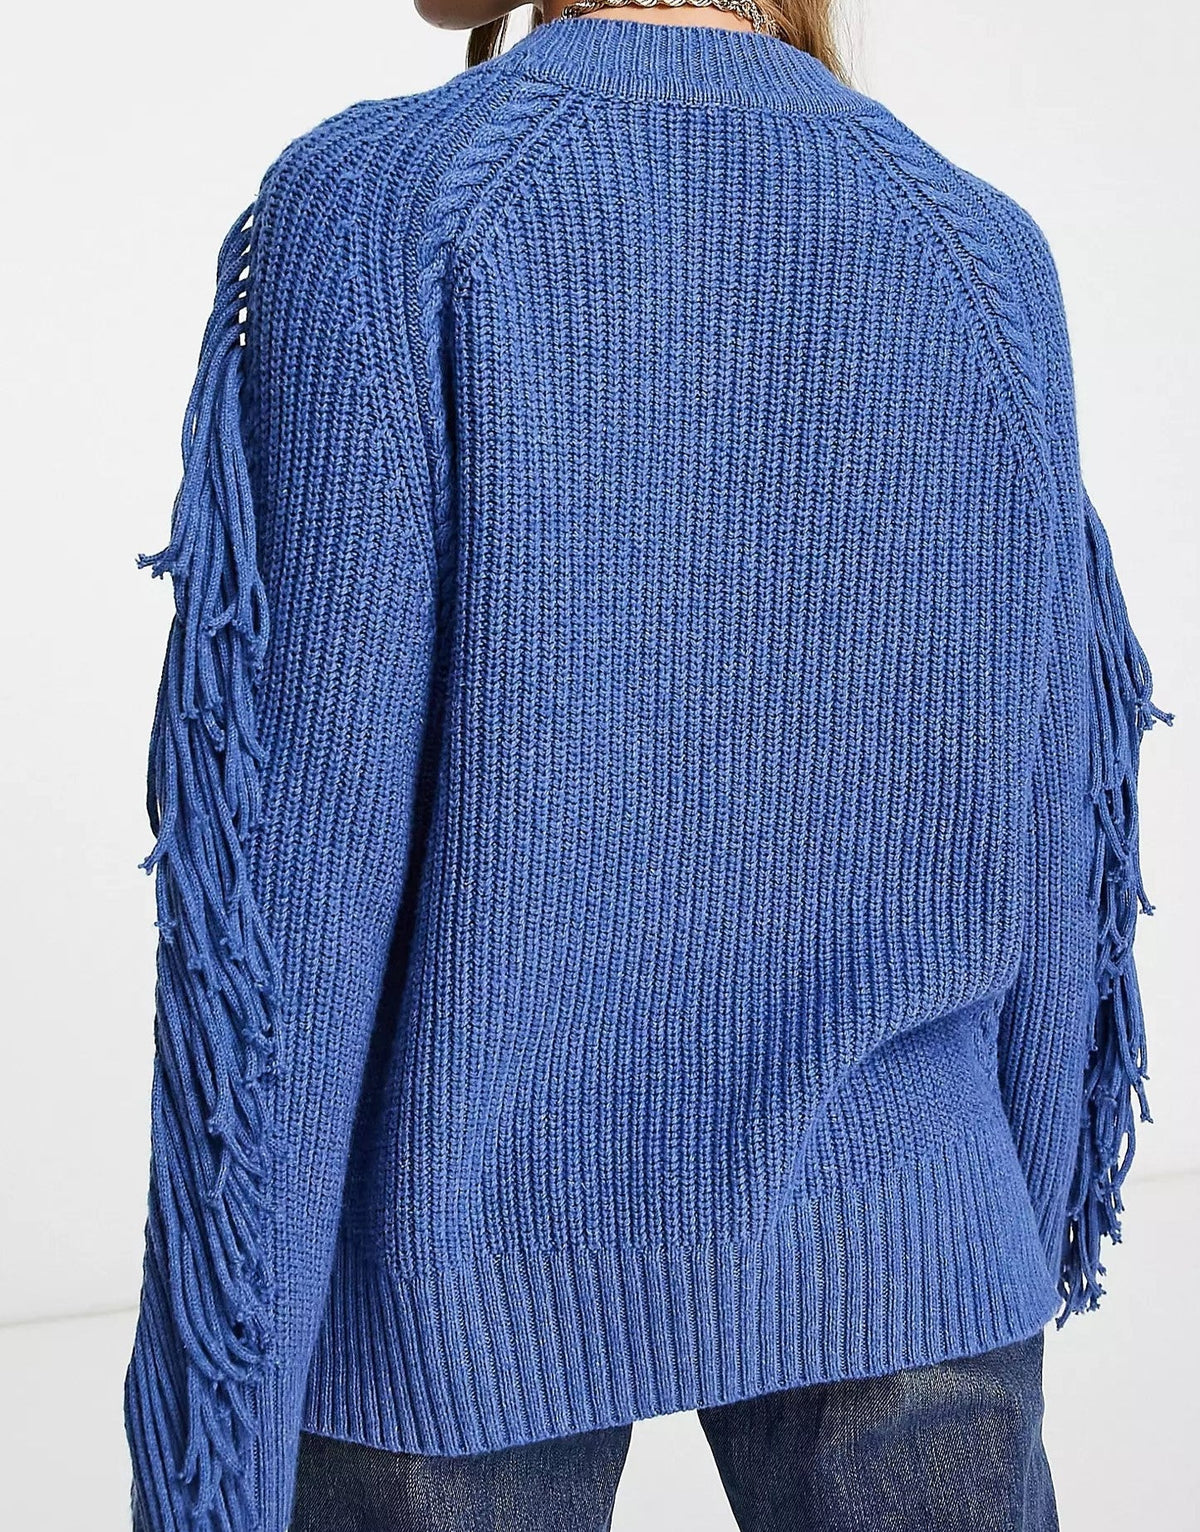 Whistles Womens Oversized Cable Knit Jumper With Fringe Sleeves In Bold Blue